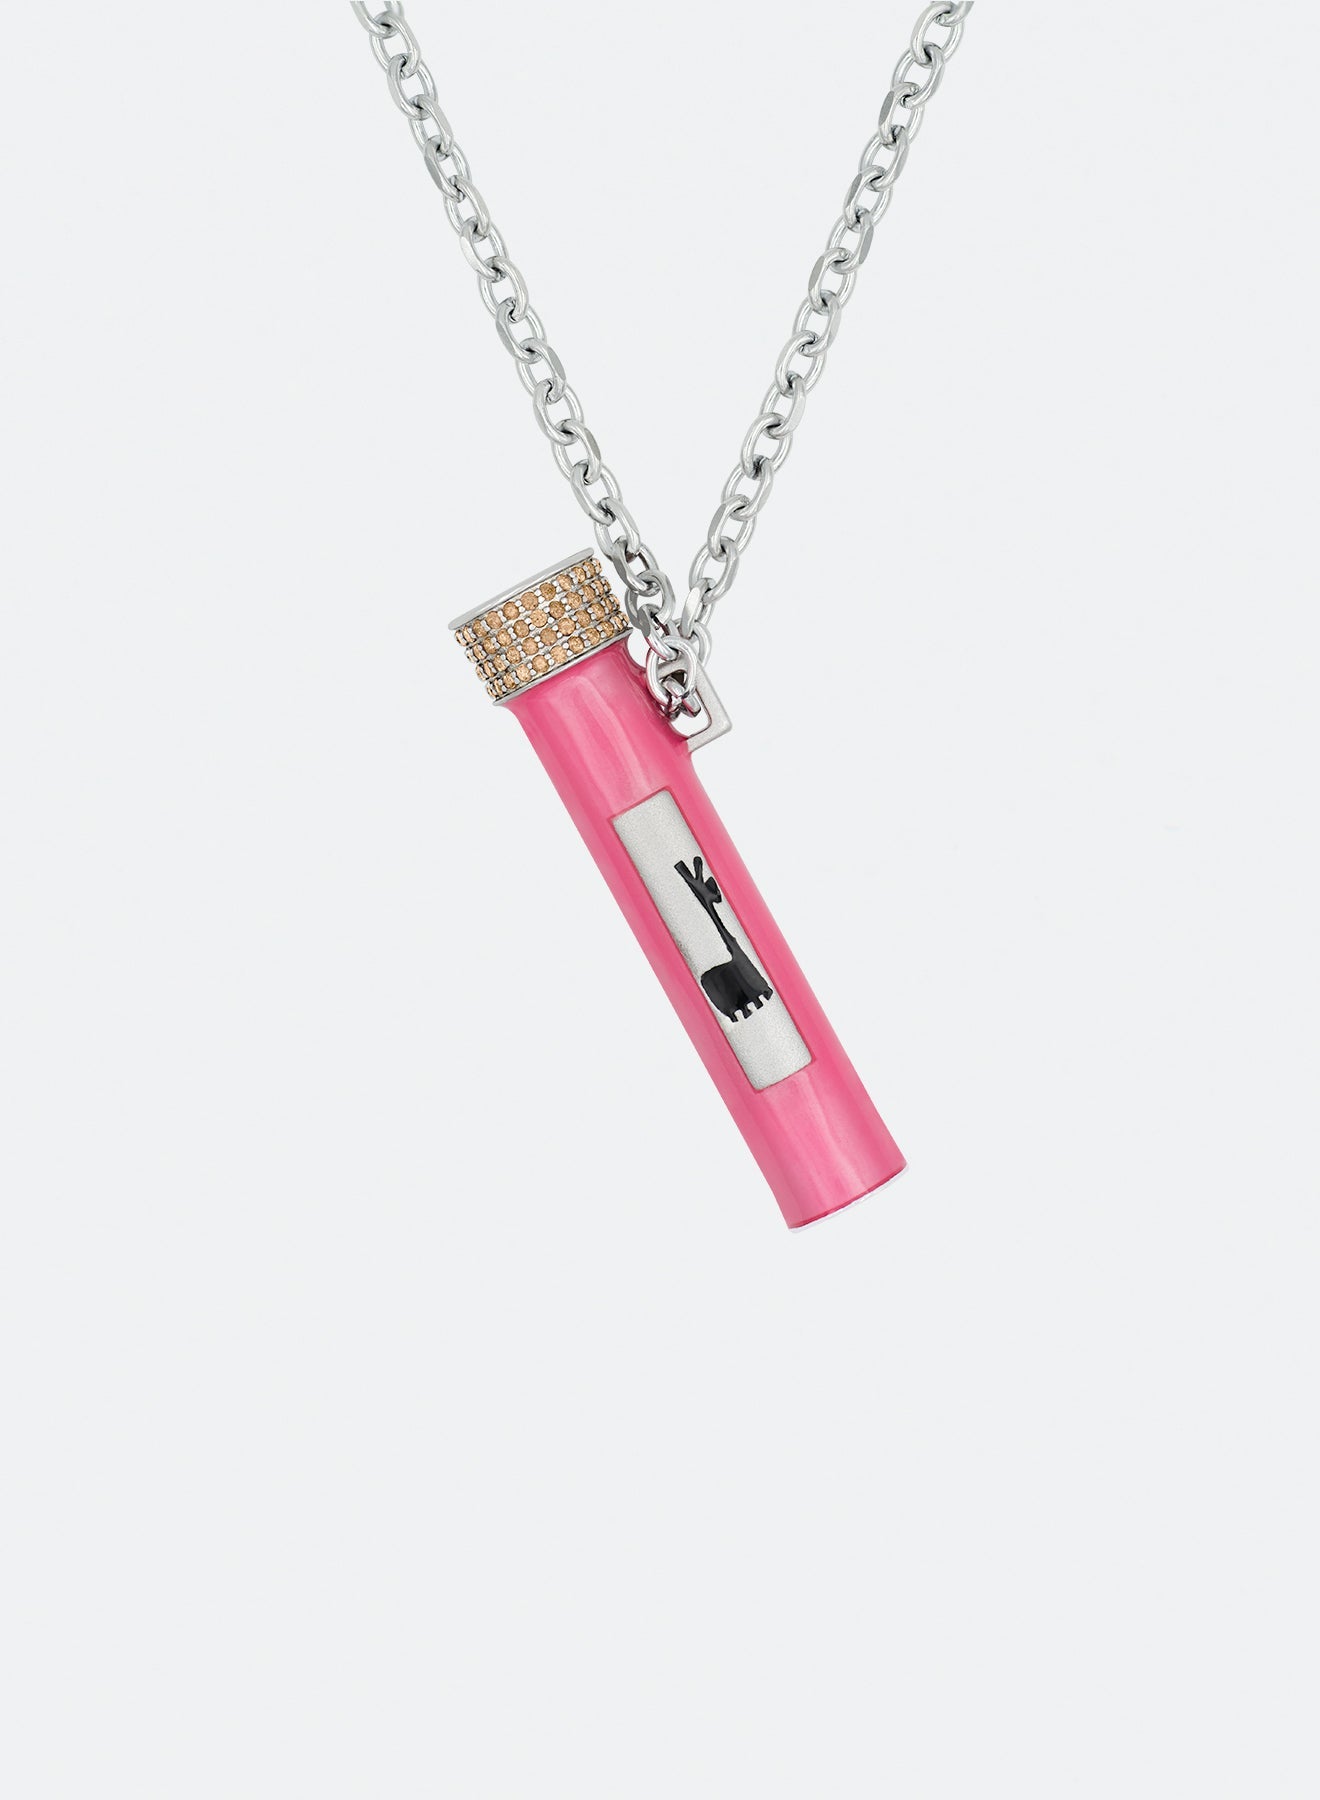 18k white gold coated vial pendant necklace with hand-set micropavé stones in coffee, pink enamel and black enamel llama with 3mm rolo chain